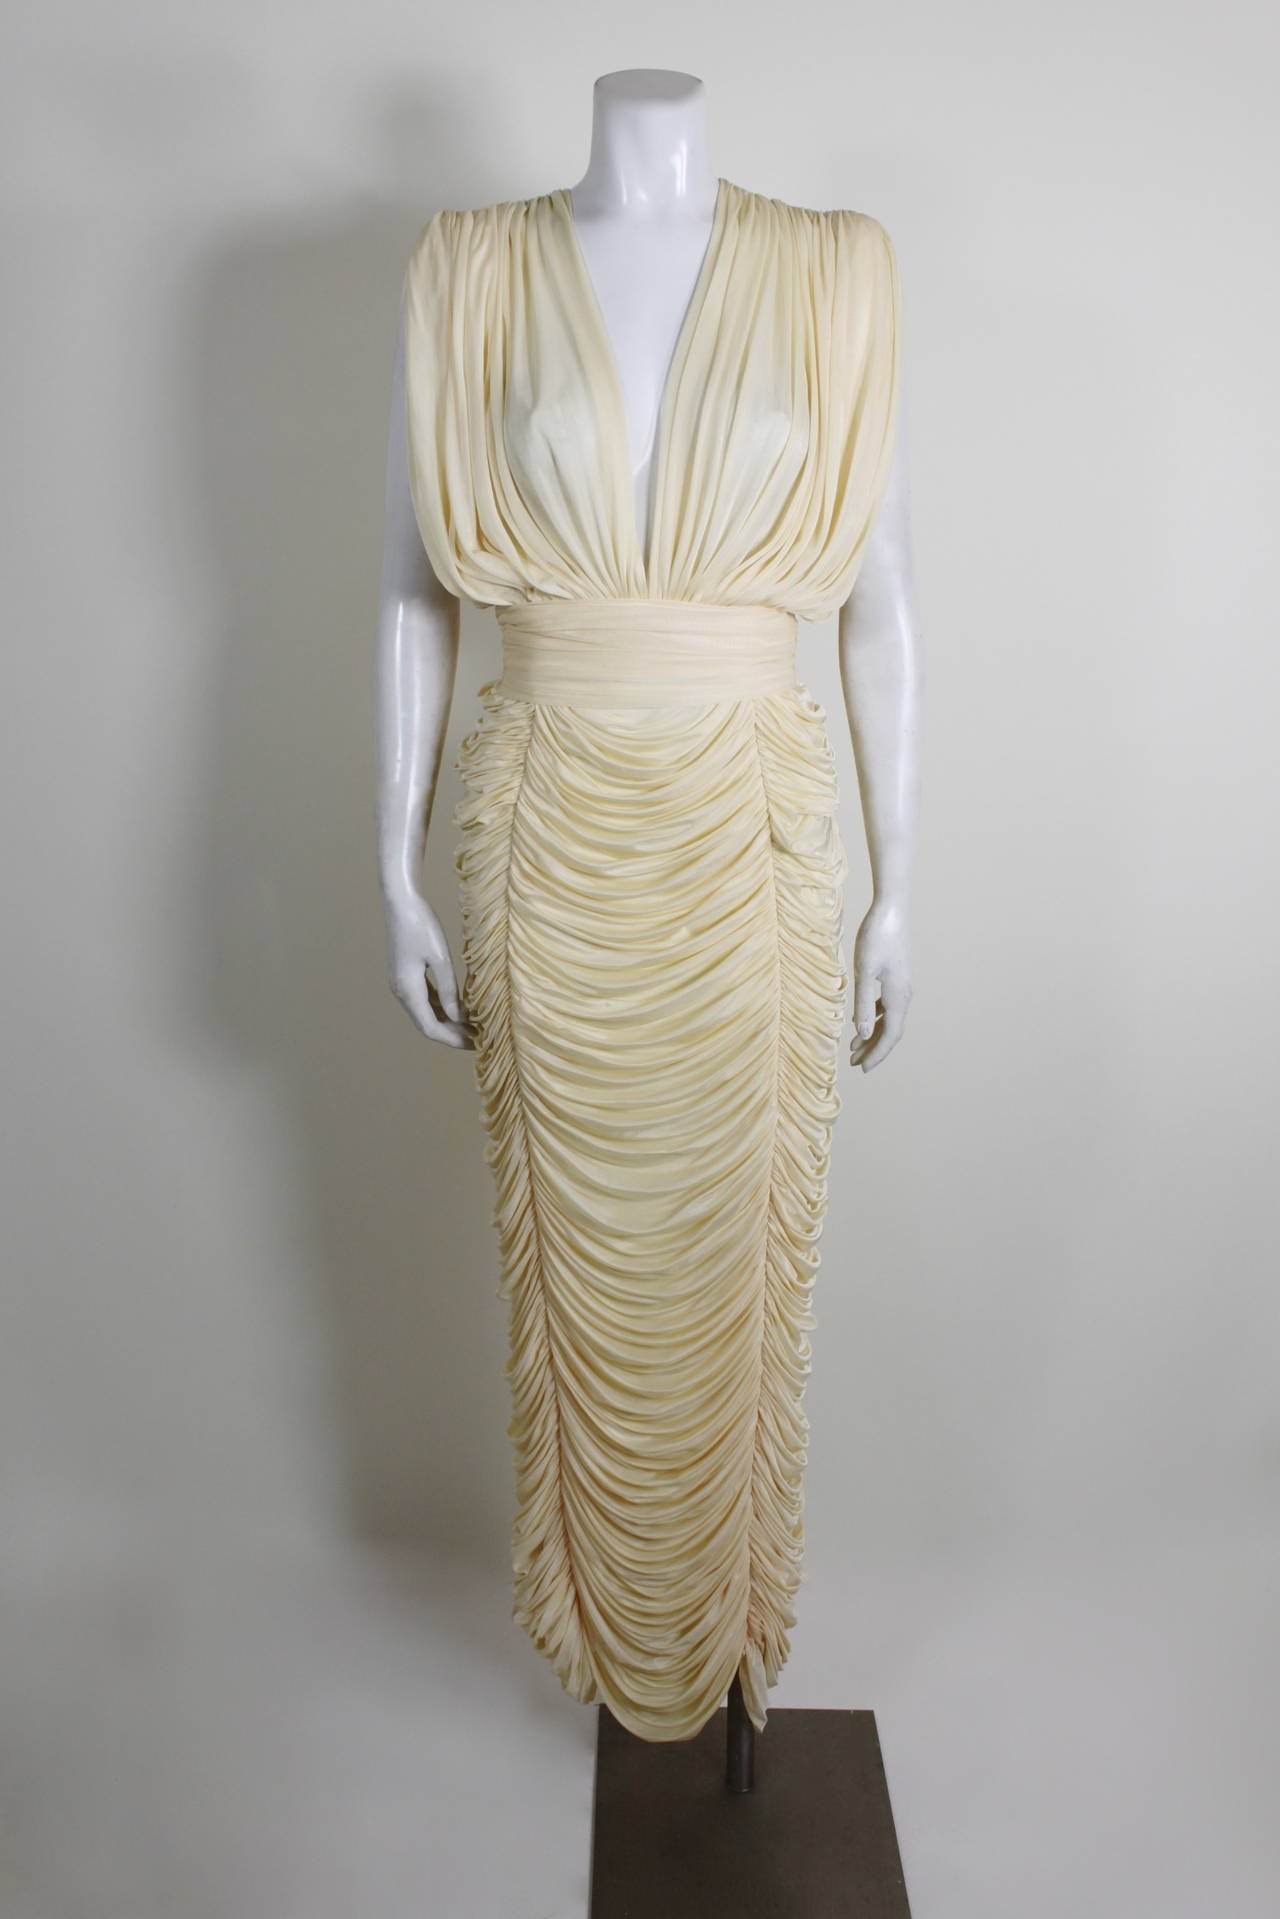 1980s Cream Tiered Confection Goddess Gown

Measurements--
*please note, the gown is quite stretchy. All measurements are done flat, but please inquire if you have additional questions regarding fit!
Bust: 36 inches
Waist: up to 32 inches
Hip: